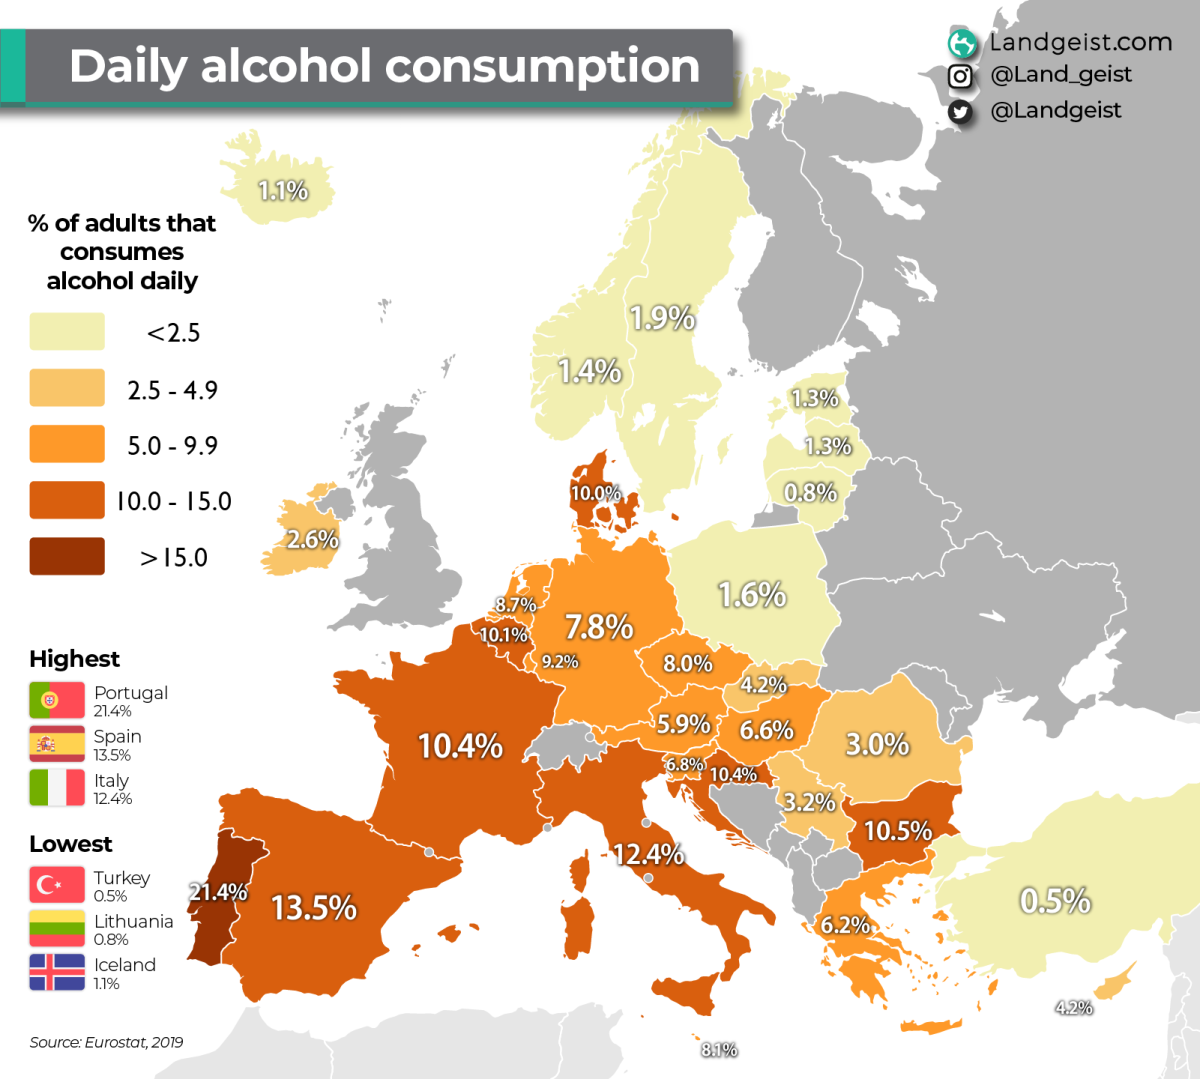 Daily Alcohol Consumption in Europe